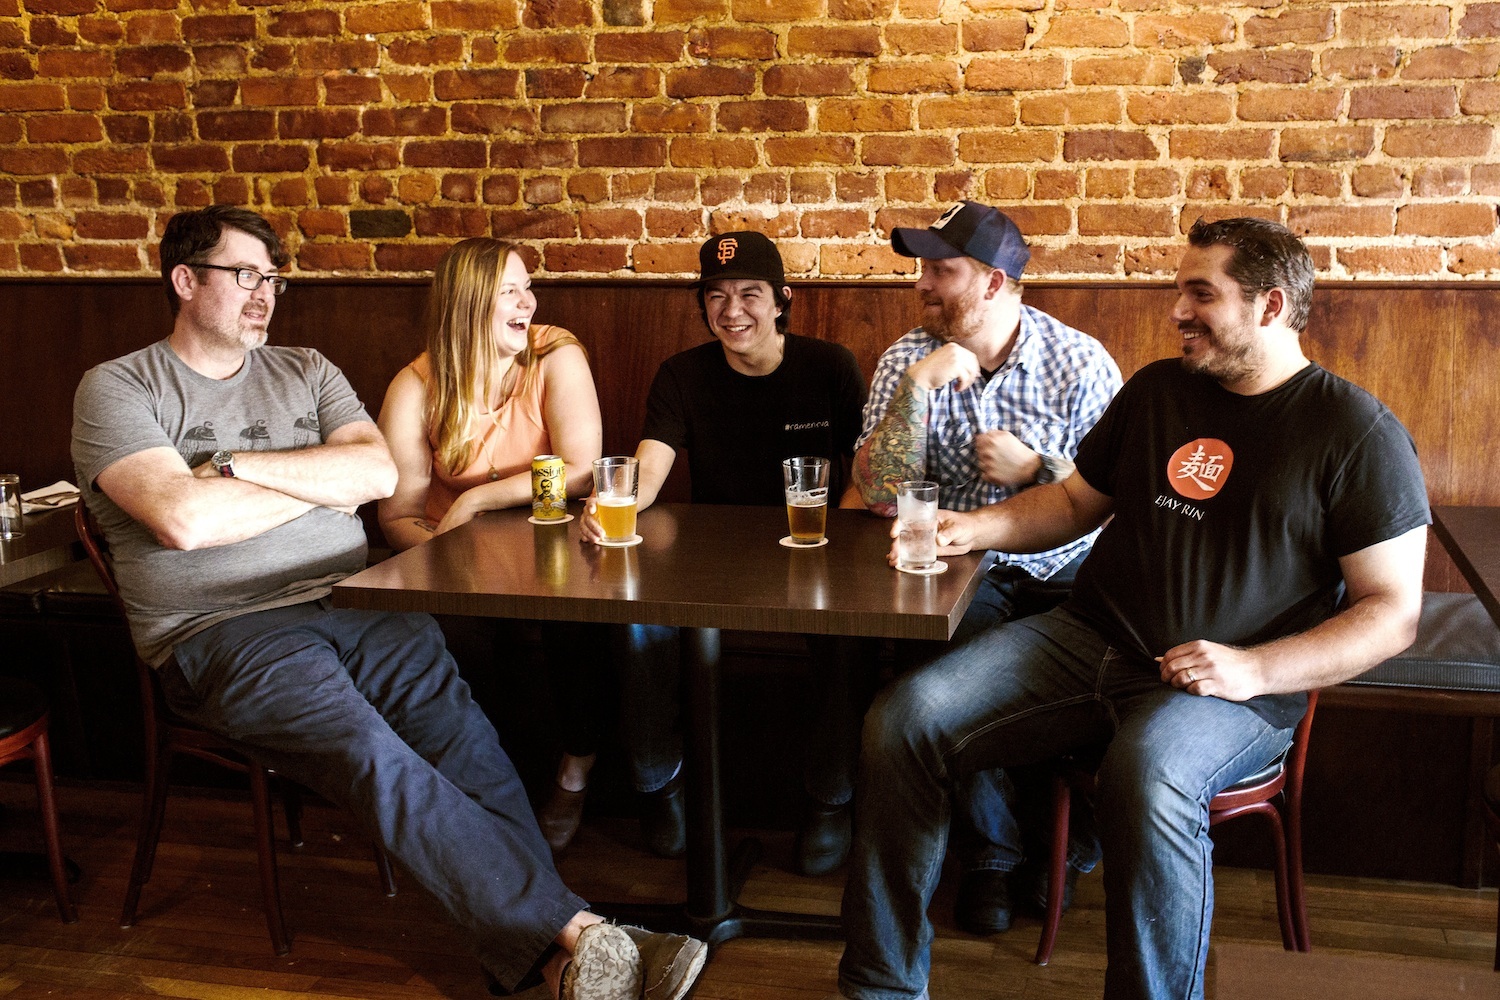 Richmond chefs from Heritage, Southbound, The Roosevelt, Shoryuken Ramen, The Magpie and Metzger Bar & Butchery